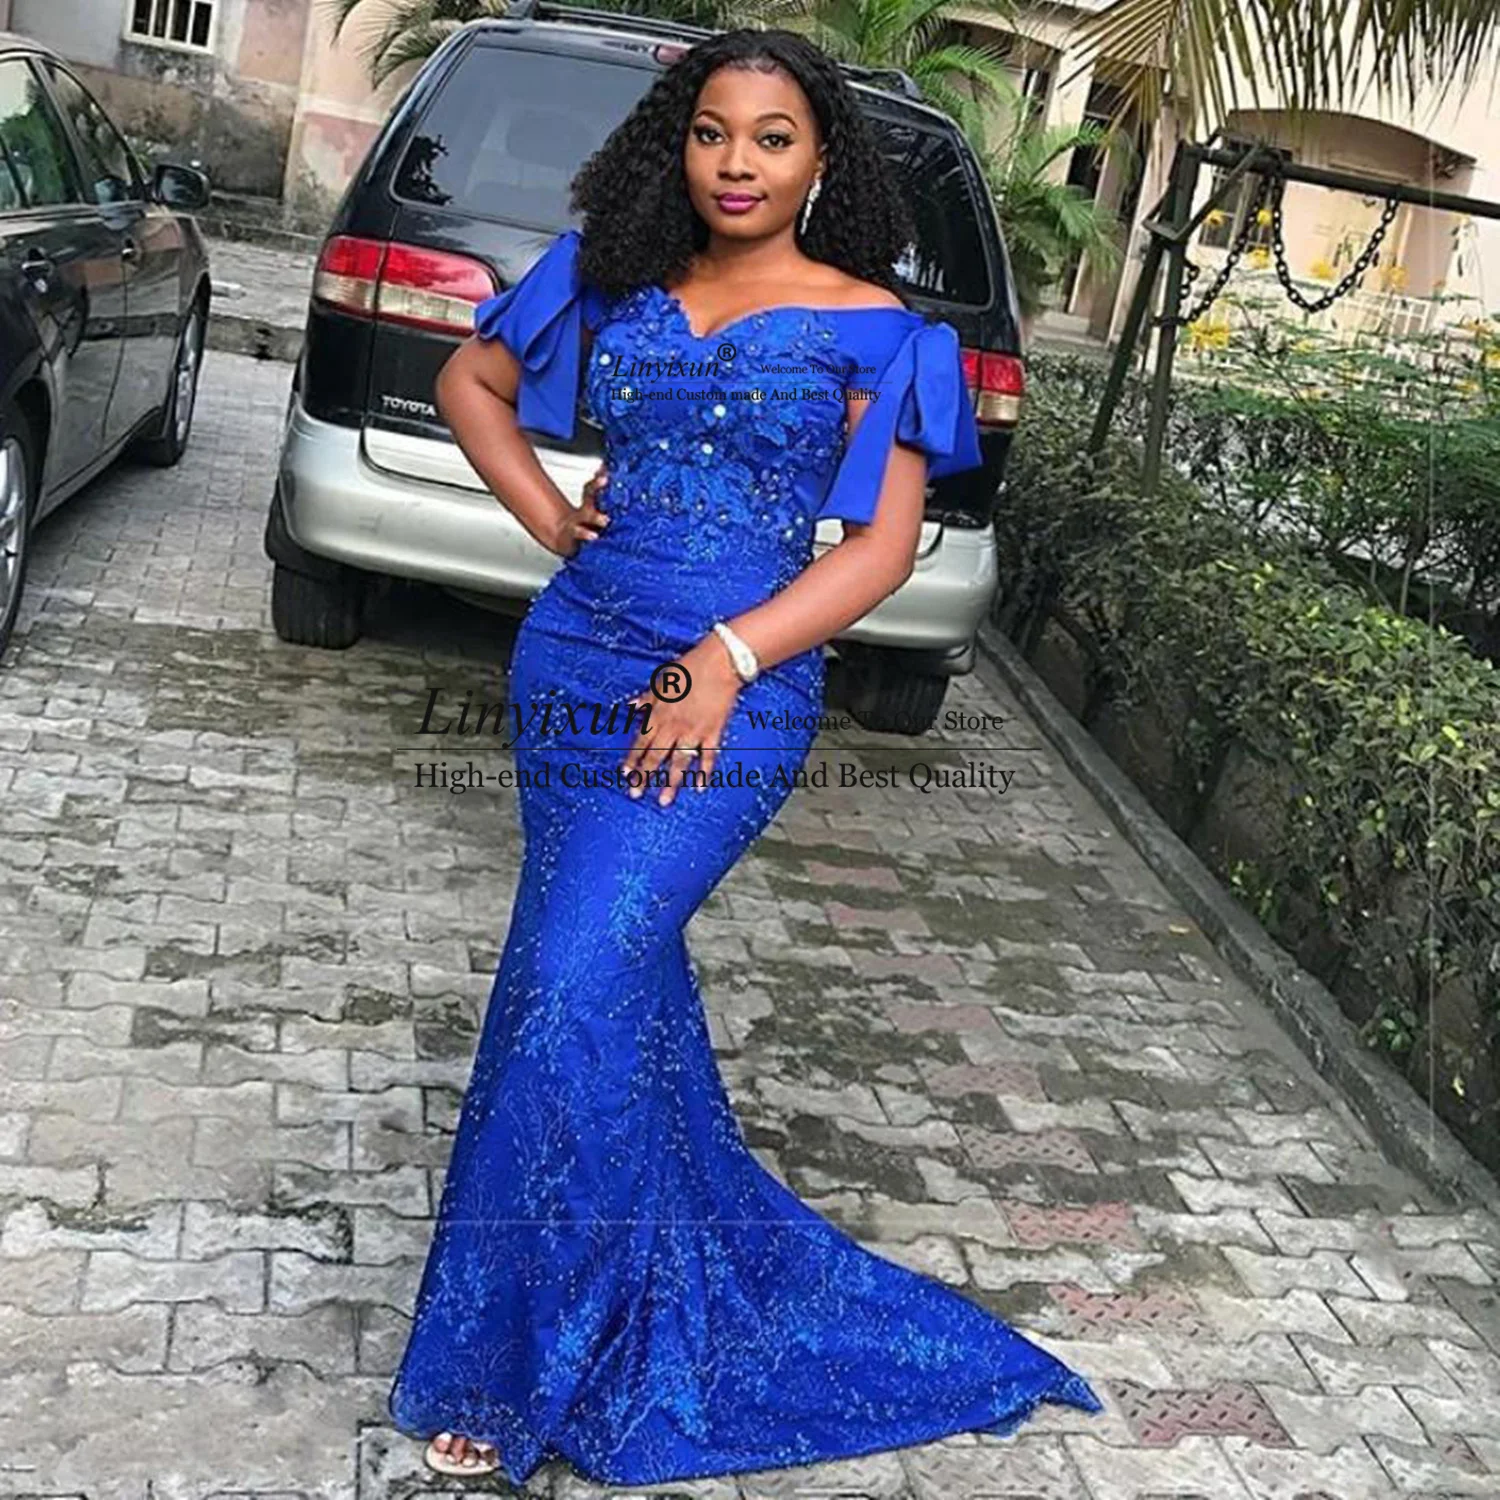 High Quality Navy Lace Ball Gown One Shoulder Evening Gown With Beaded  Sweetheart Neckline, Sweep Train, And One Shoulder Perfect For Prom And  Formal Events From Allanhu, $128.82 | DHgate.Com